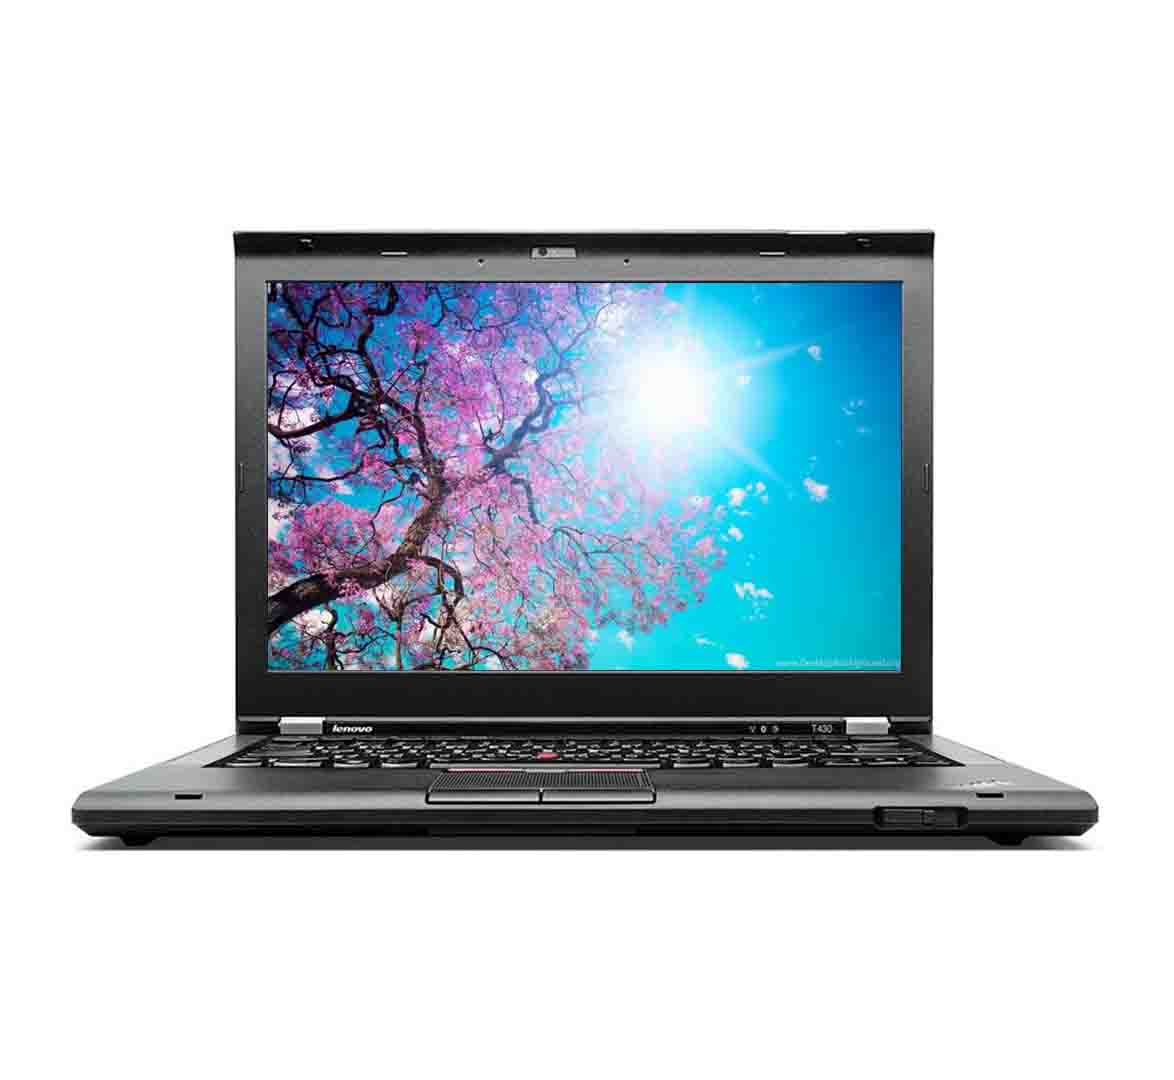 Lenovo ThinkPad T430 best laptop for business and personal use